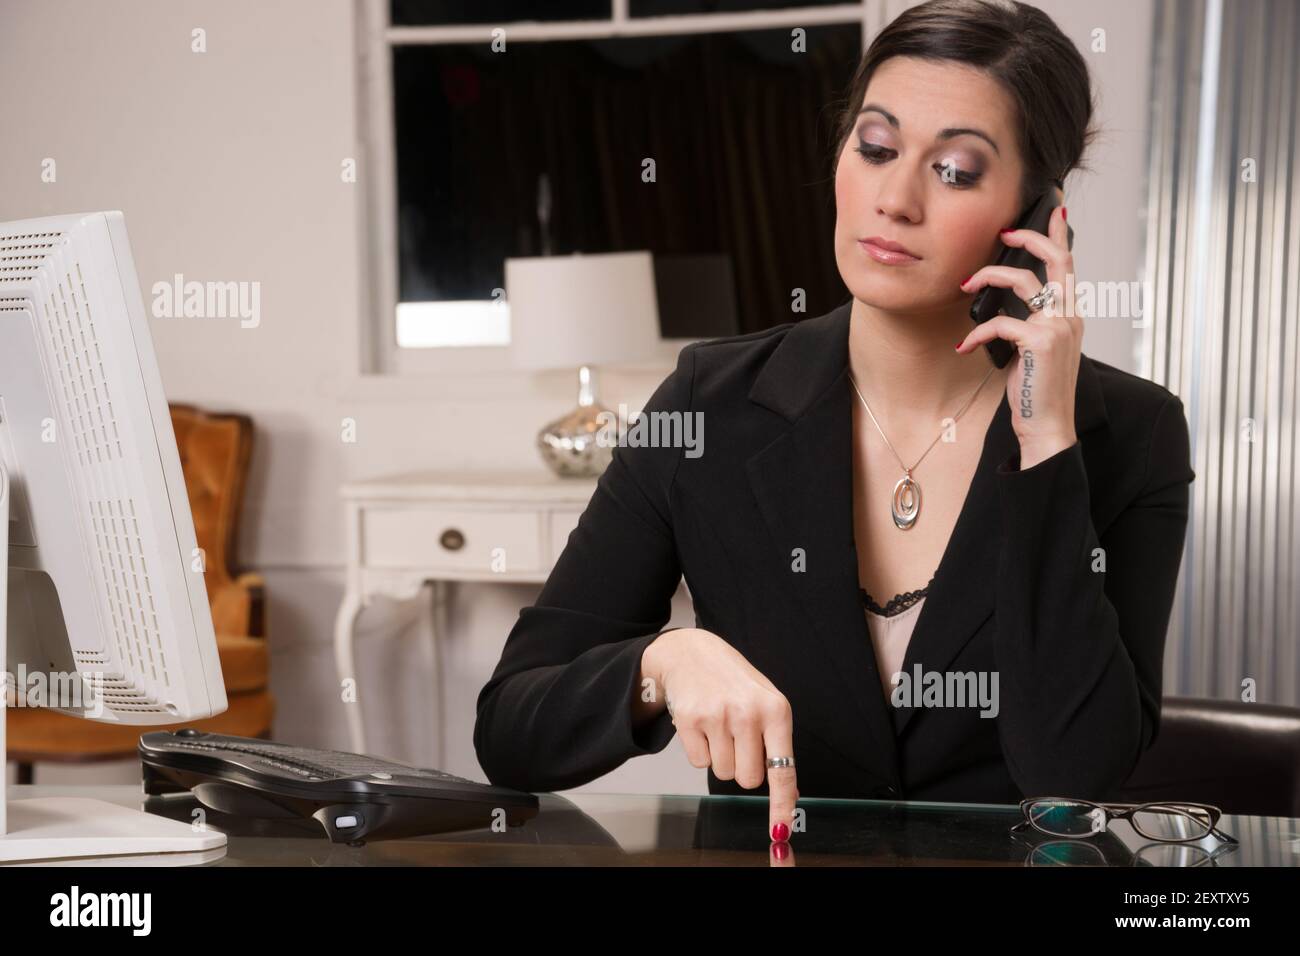 Business Woman in Adversarial Conversation Computer Desk Cell Phone Stock Photo